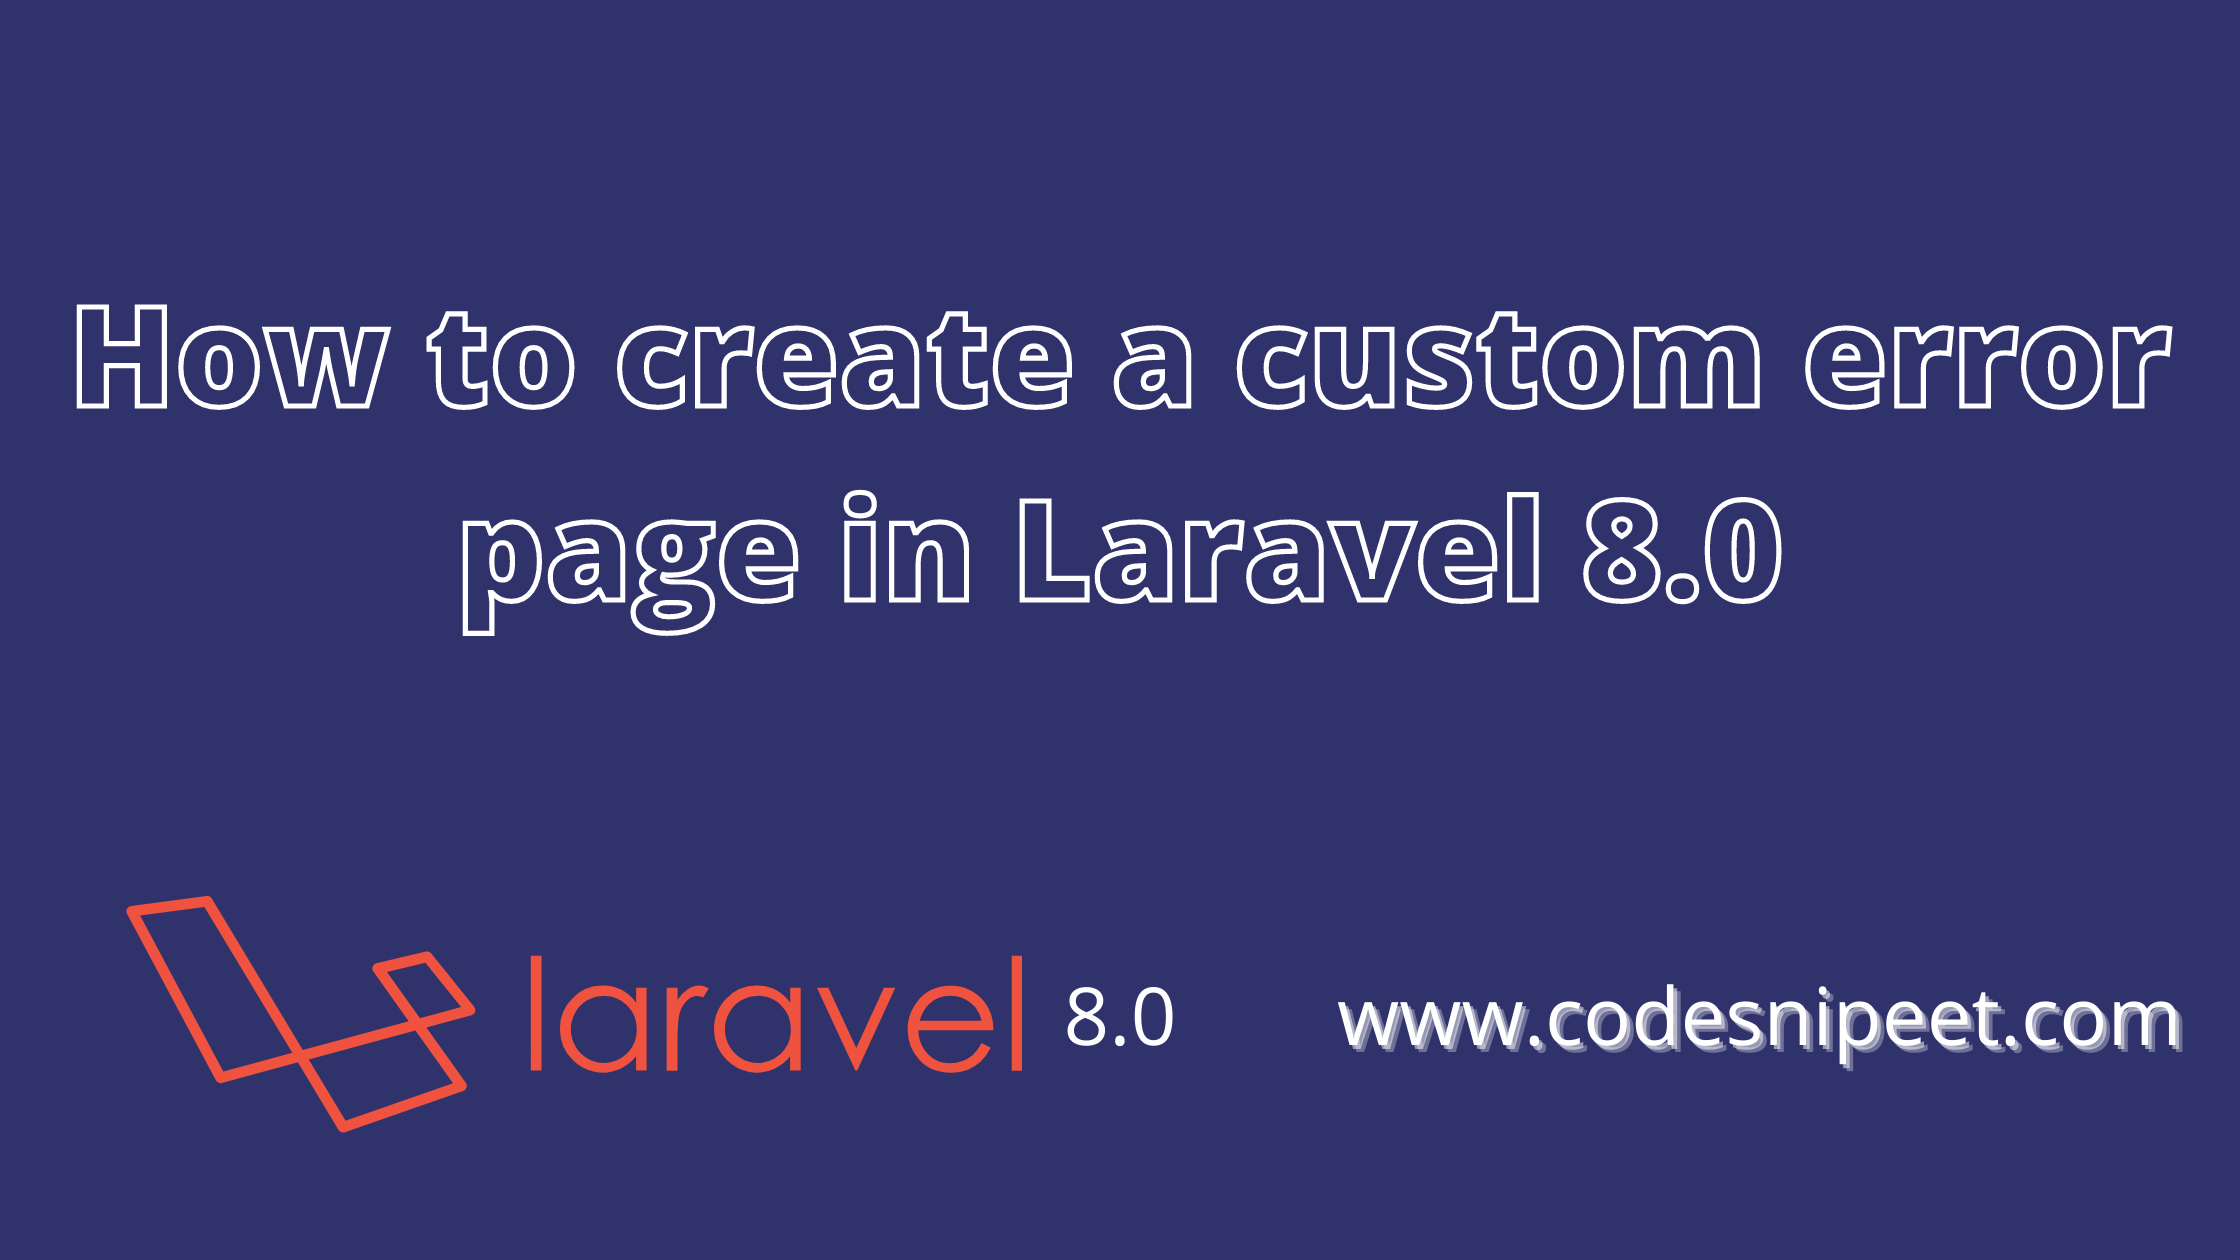 You are currently viewing How to create a custom error page in Laravel 8.0